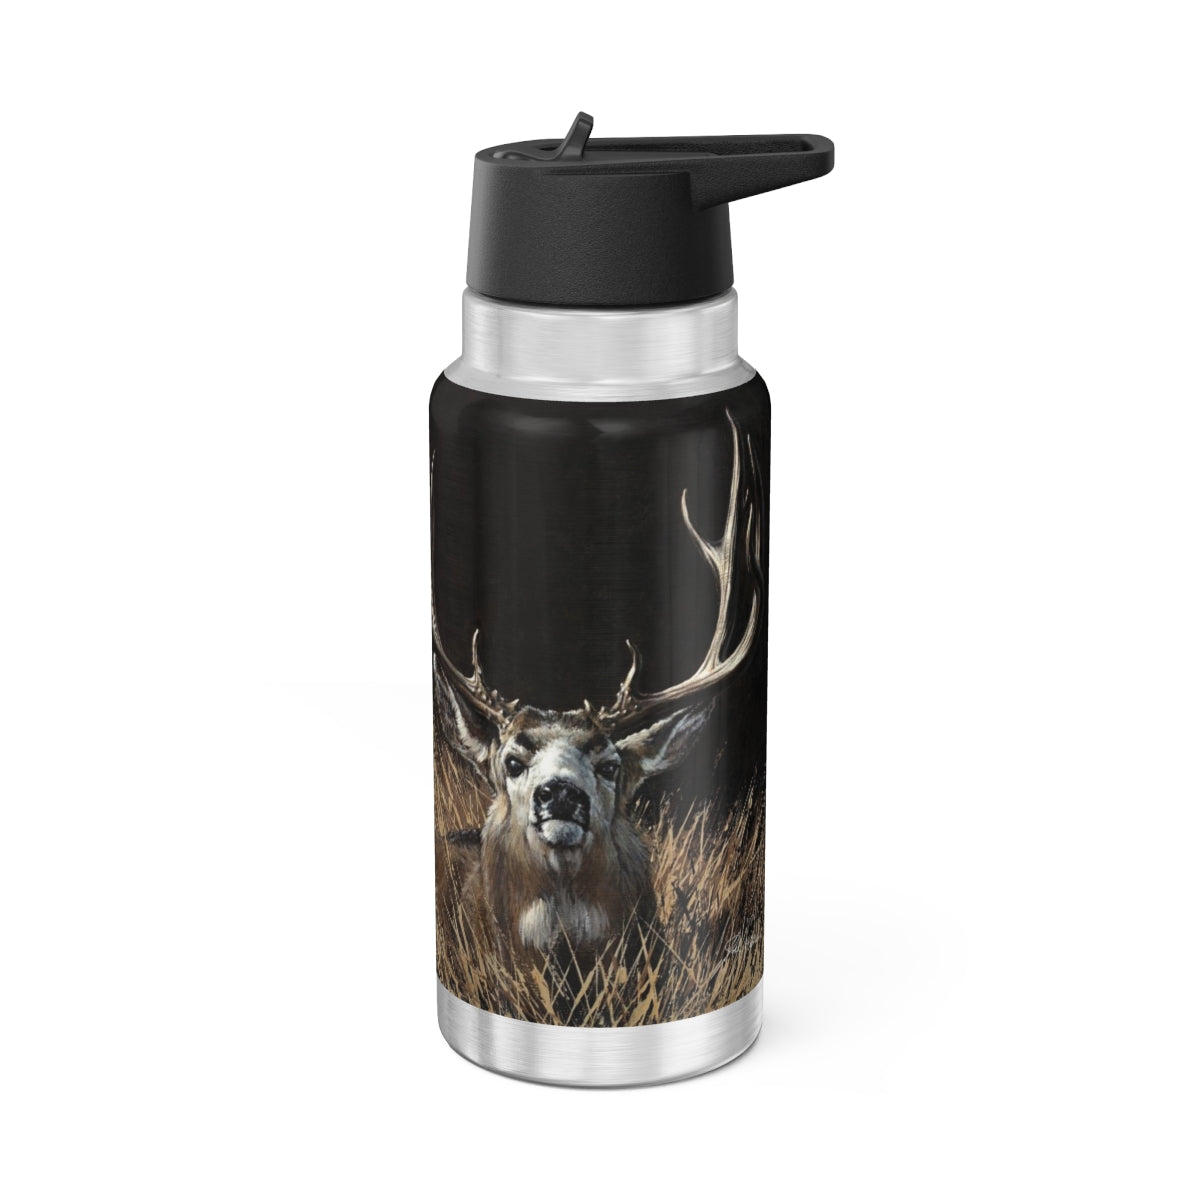 "Eye Contact" 32oz Stainless Steel Bottle